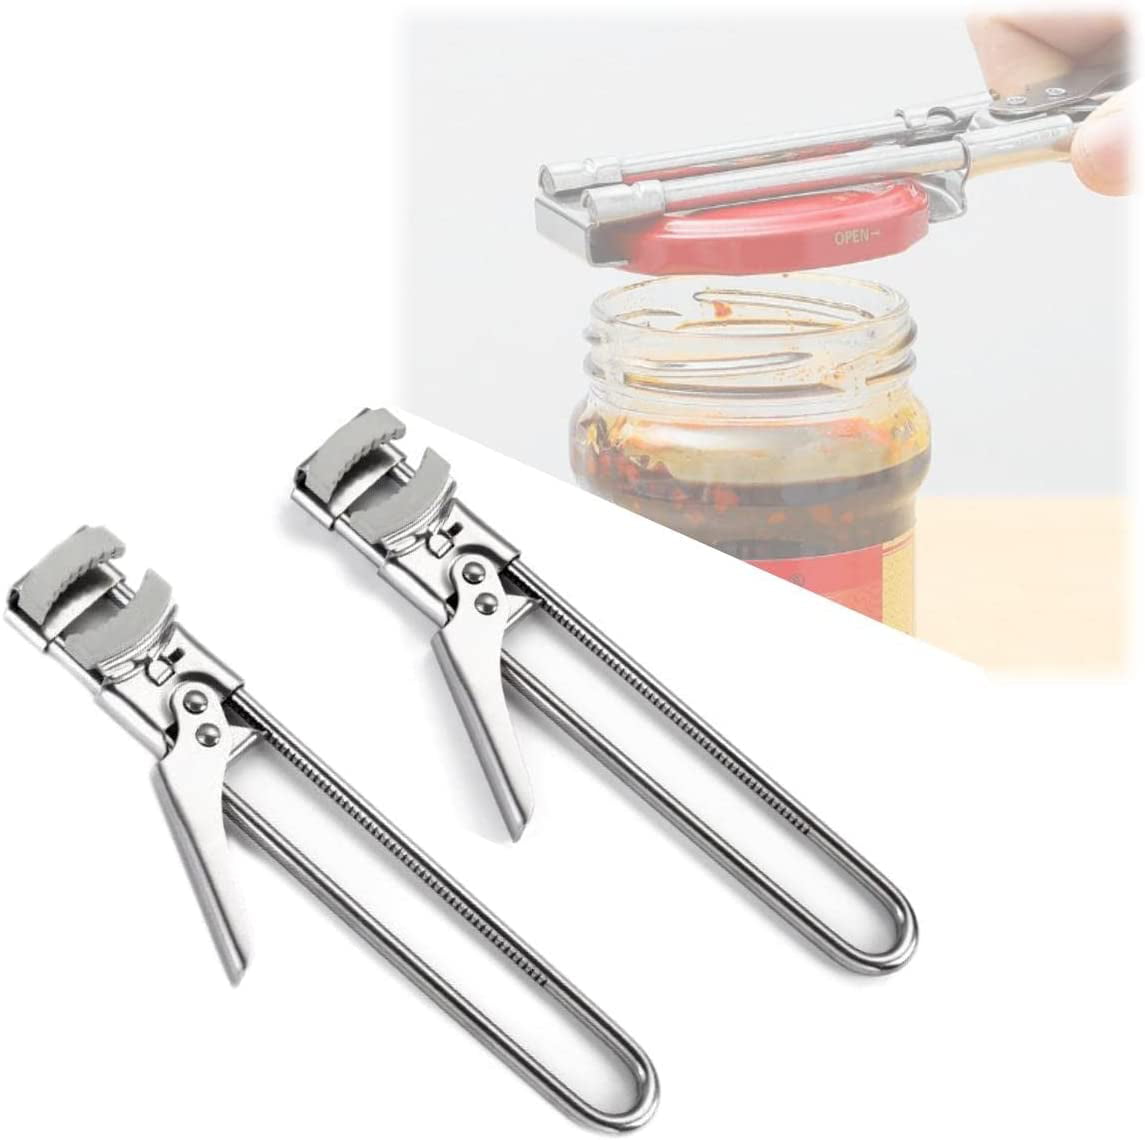 Save on Can Openers - Yahoo Shopping